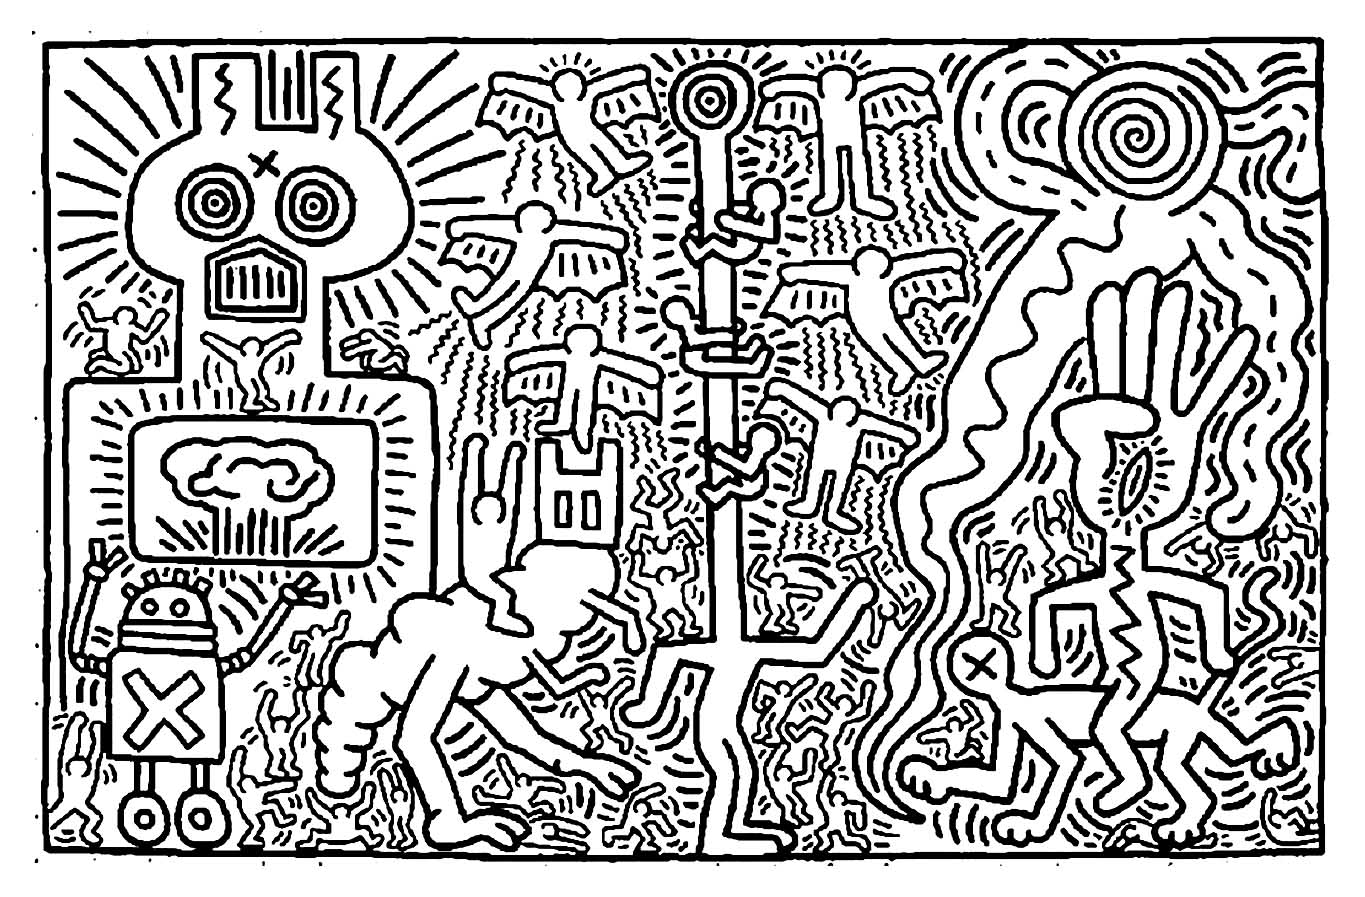 Keith haring 2 Art Coloriages difficiles pour adultes JustColor